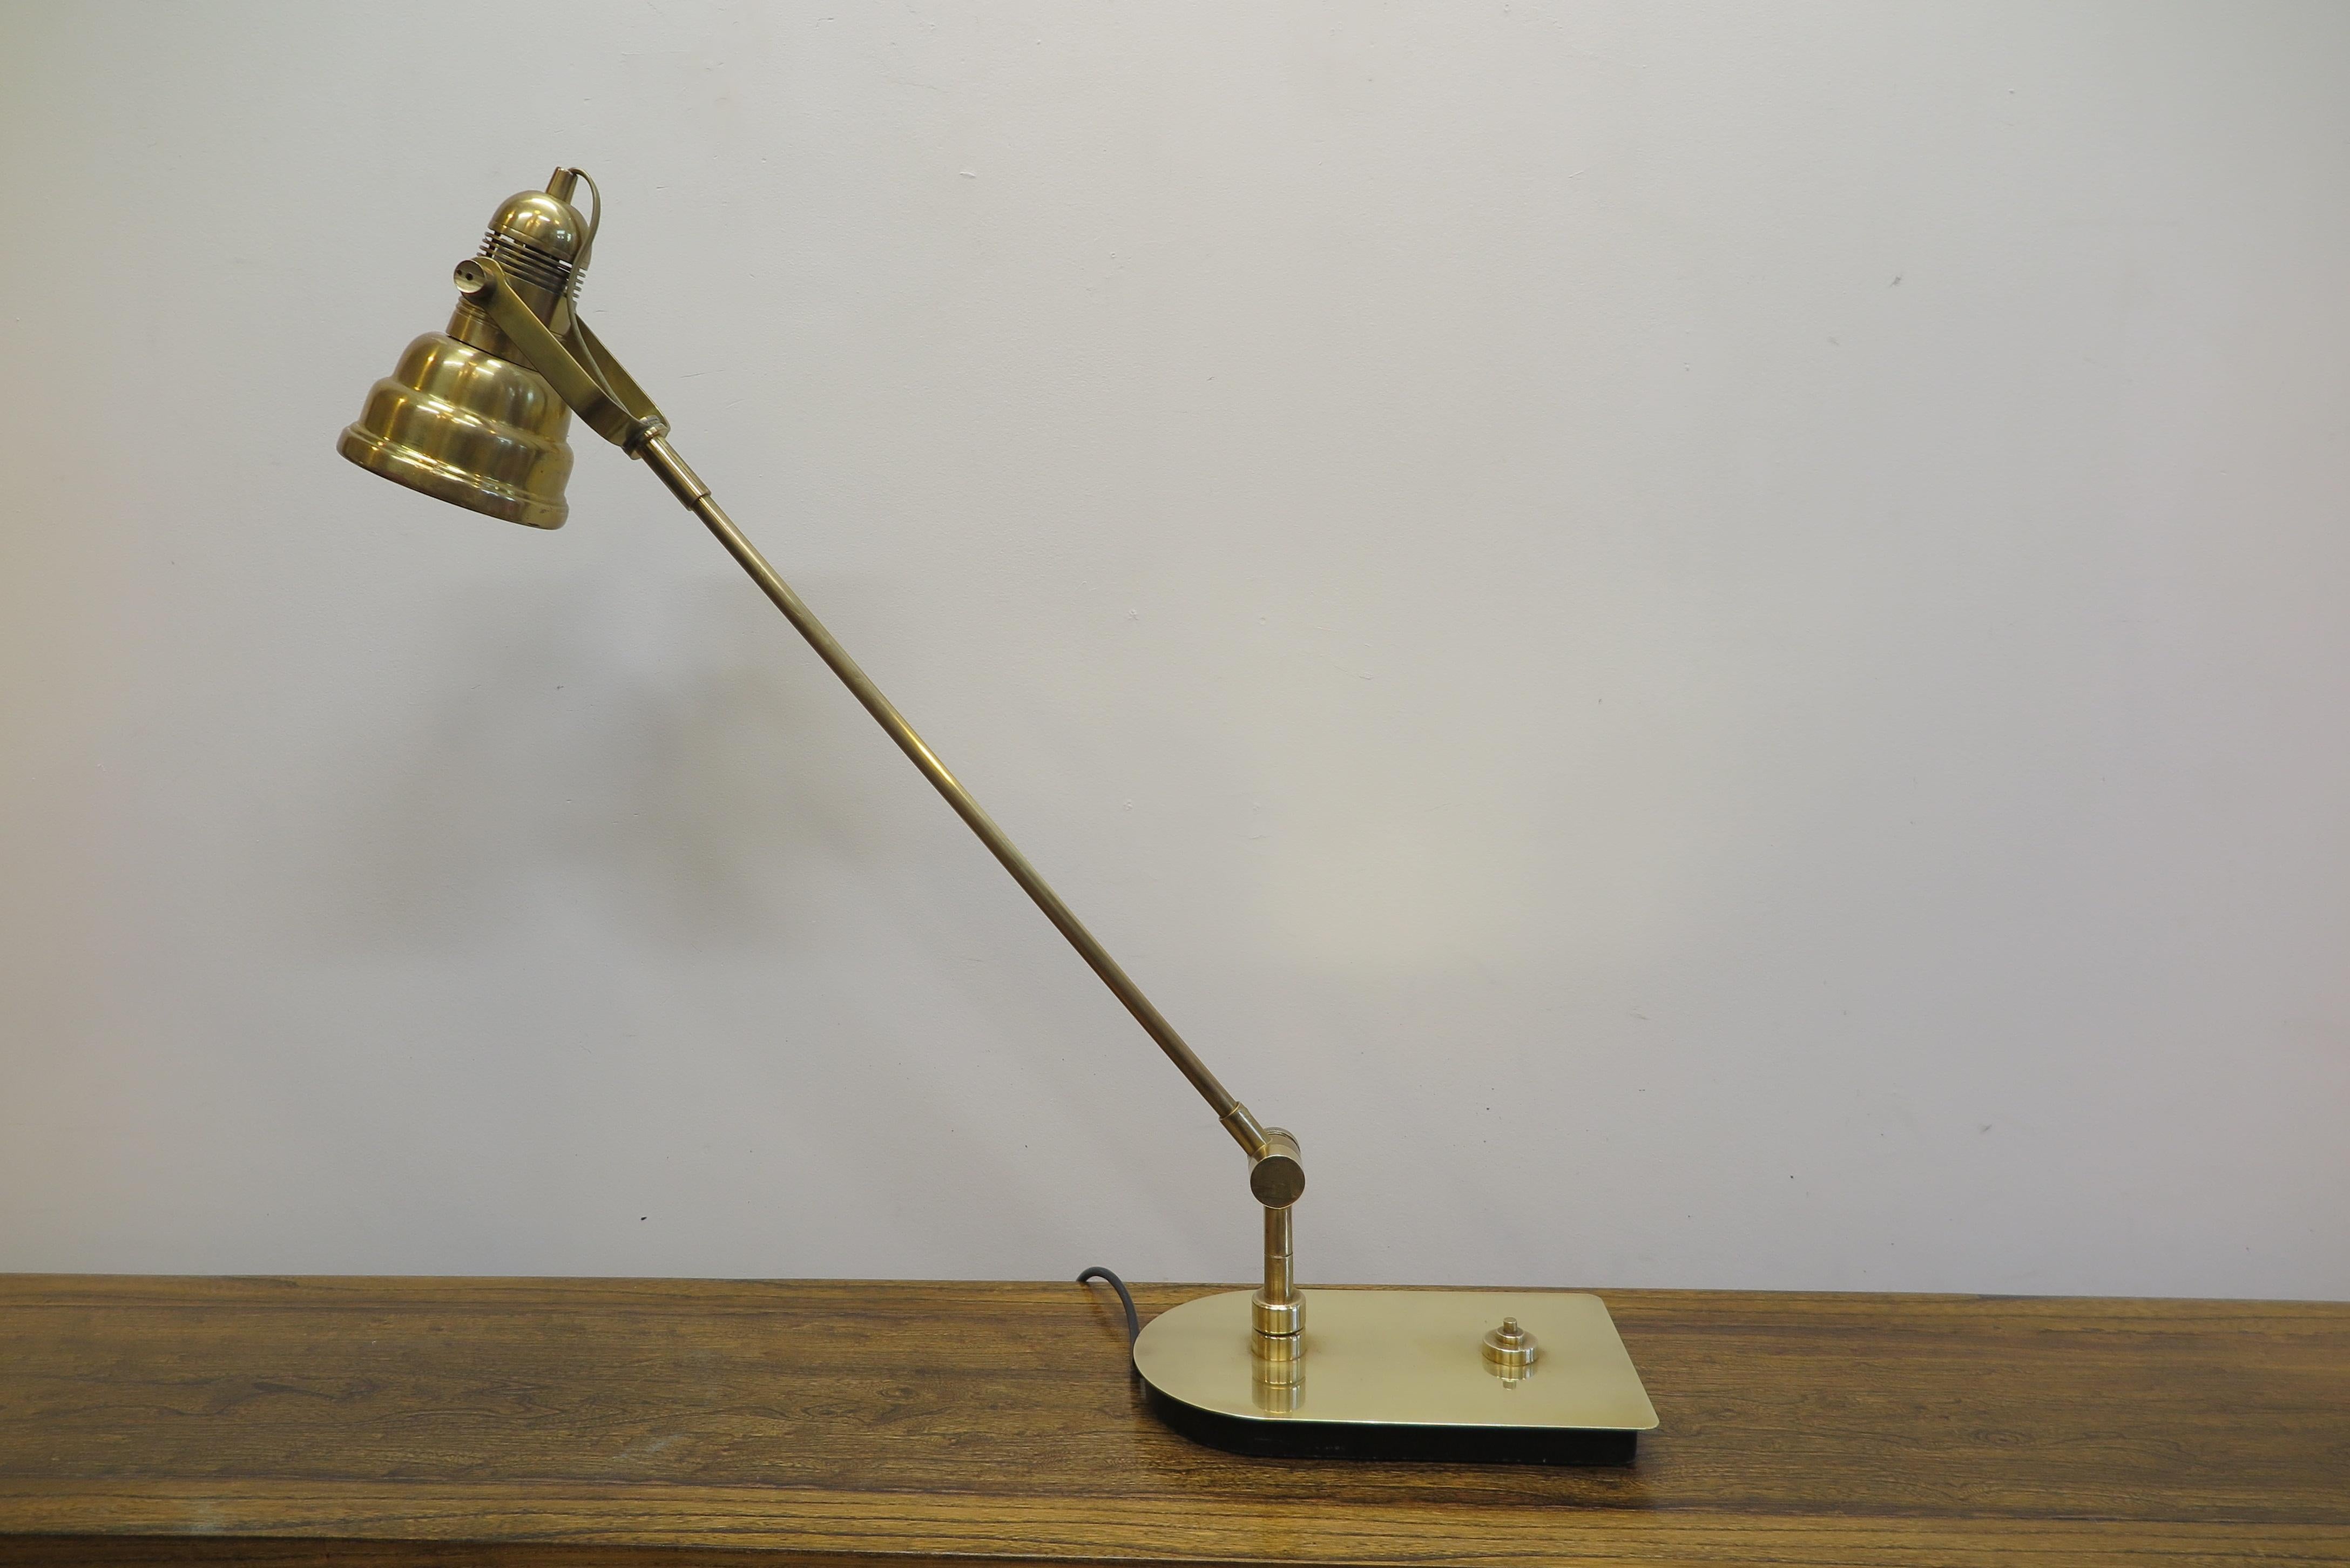 Midcentury brass articulating table lamp having a brass shade. Arm moves 180 degrees from front to back of base and can swing to the left side or right side 45 degrees. The shade having also 180 degree movement with the ability to provide upward or